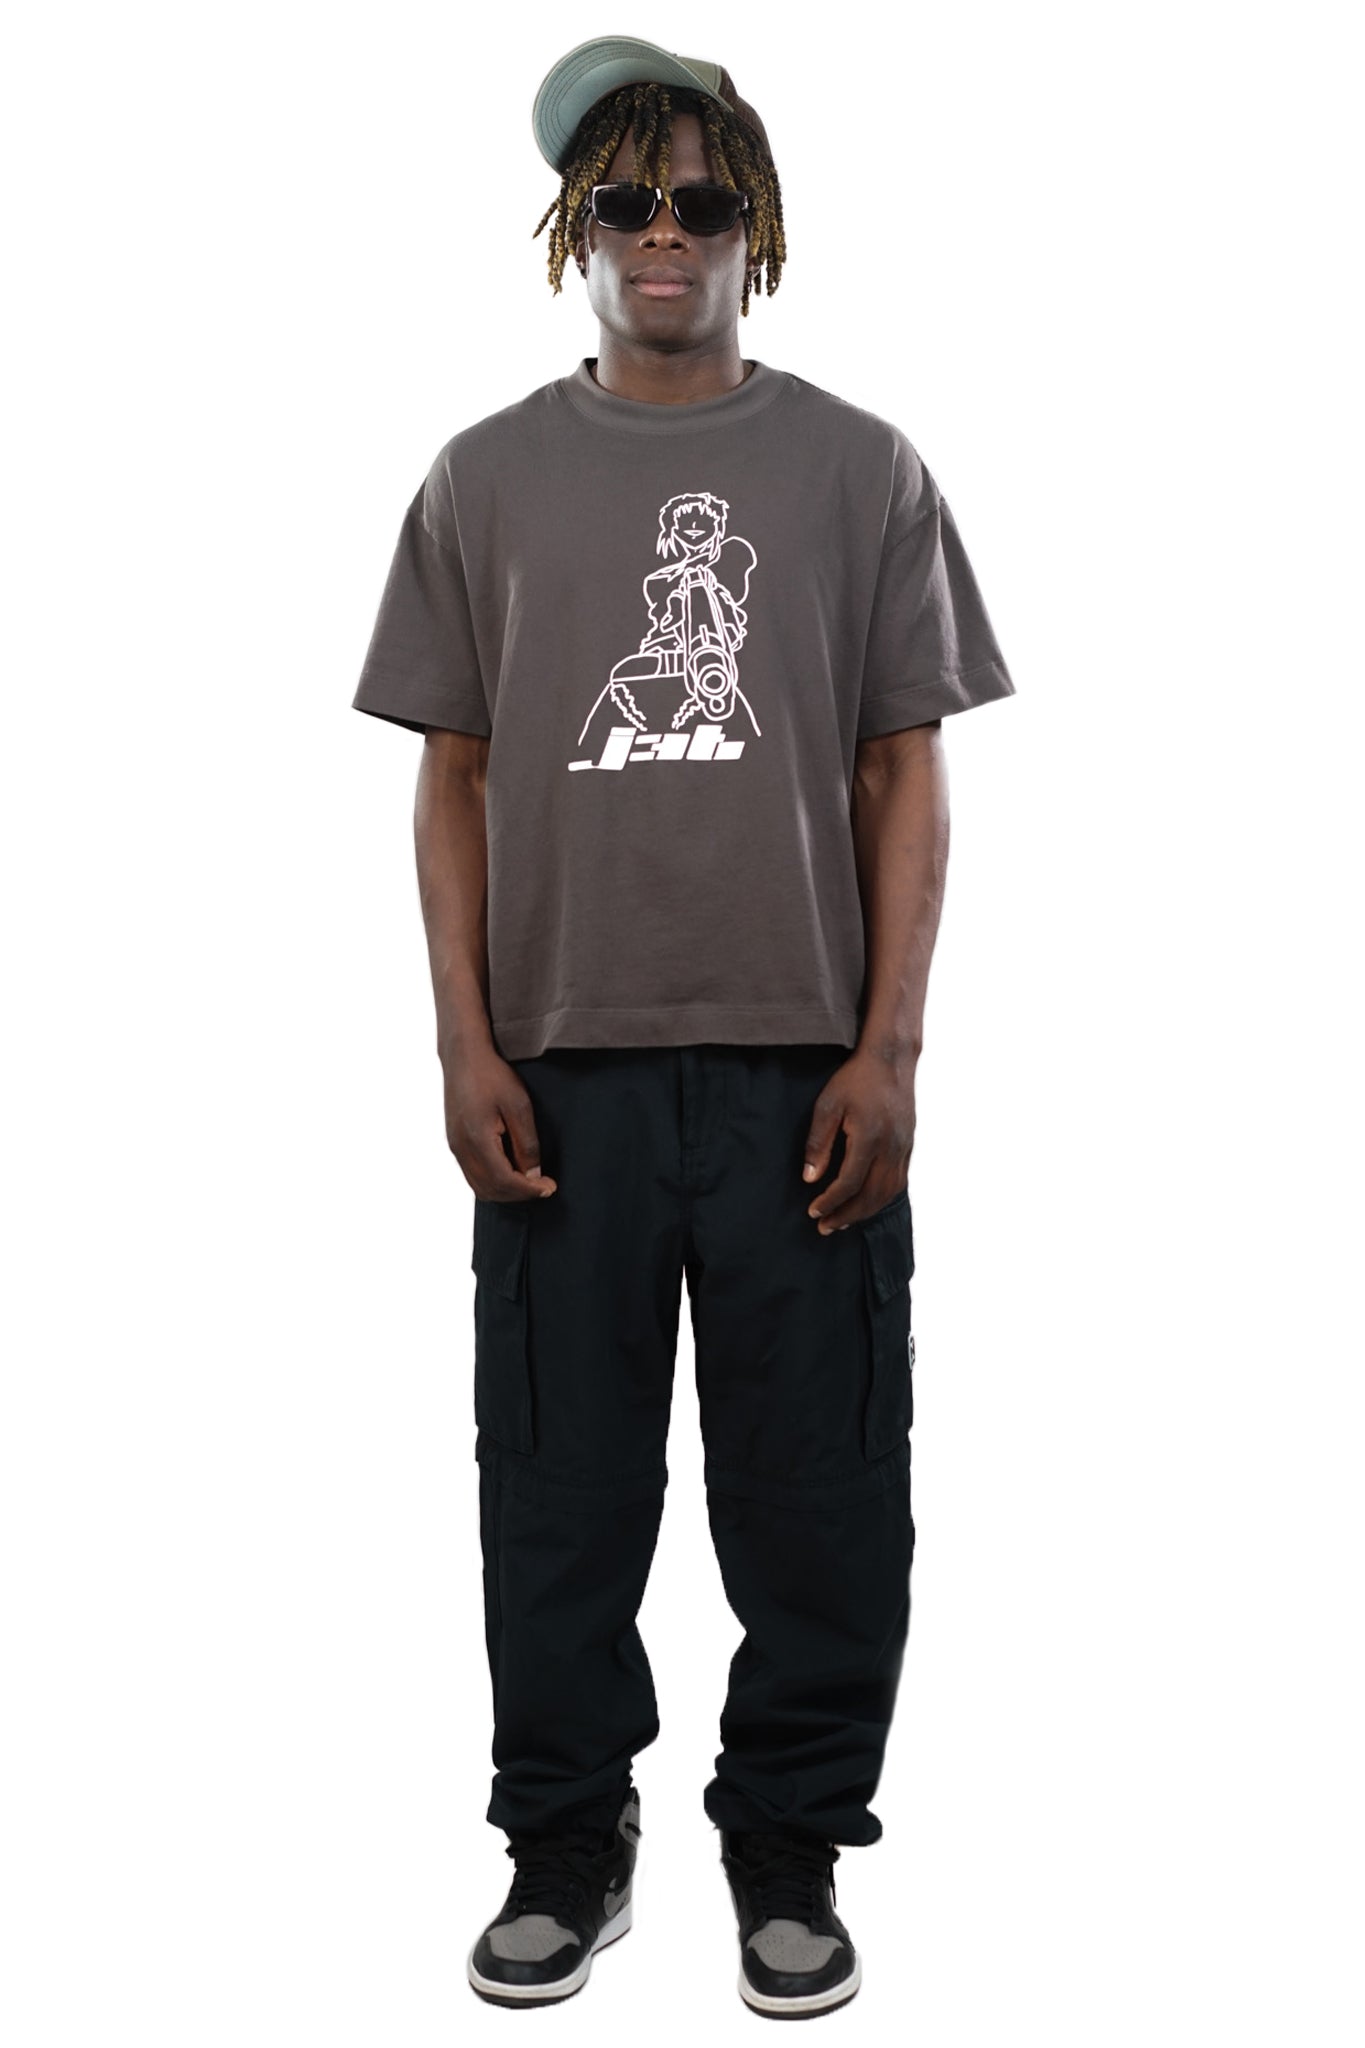 5'9" male wearing Remy Tee grey is a size medium - front angle